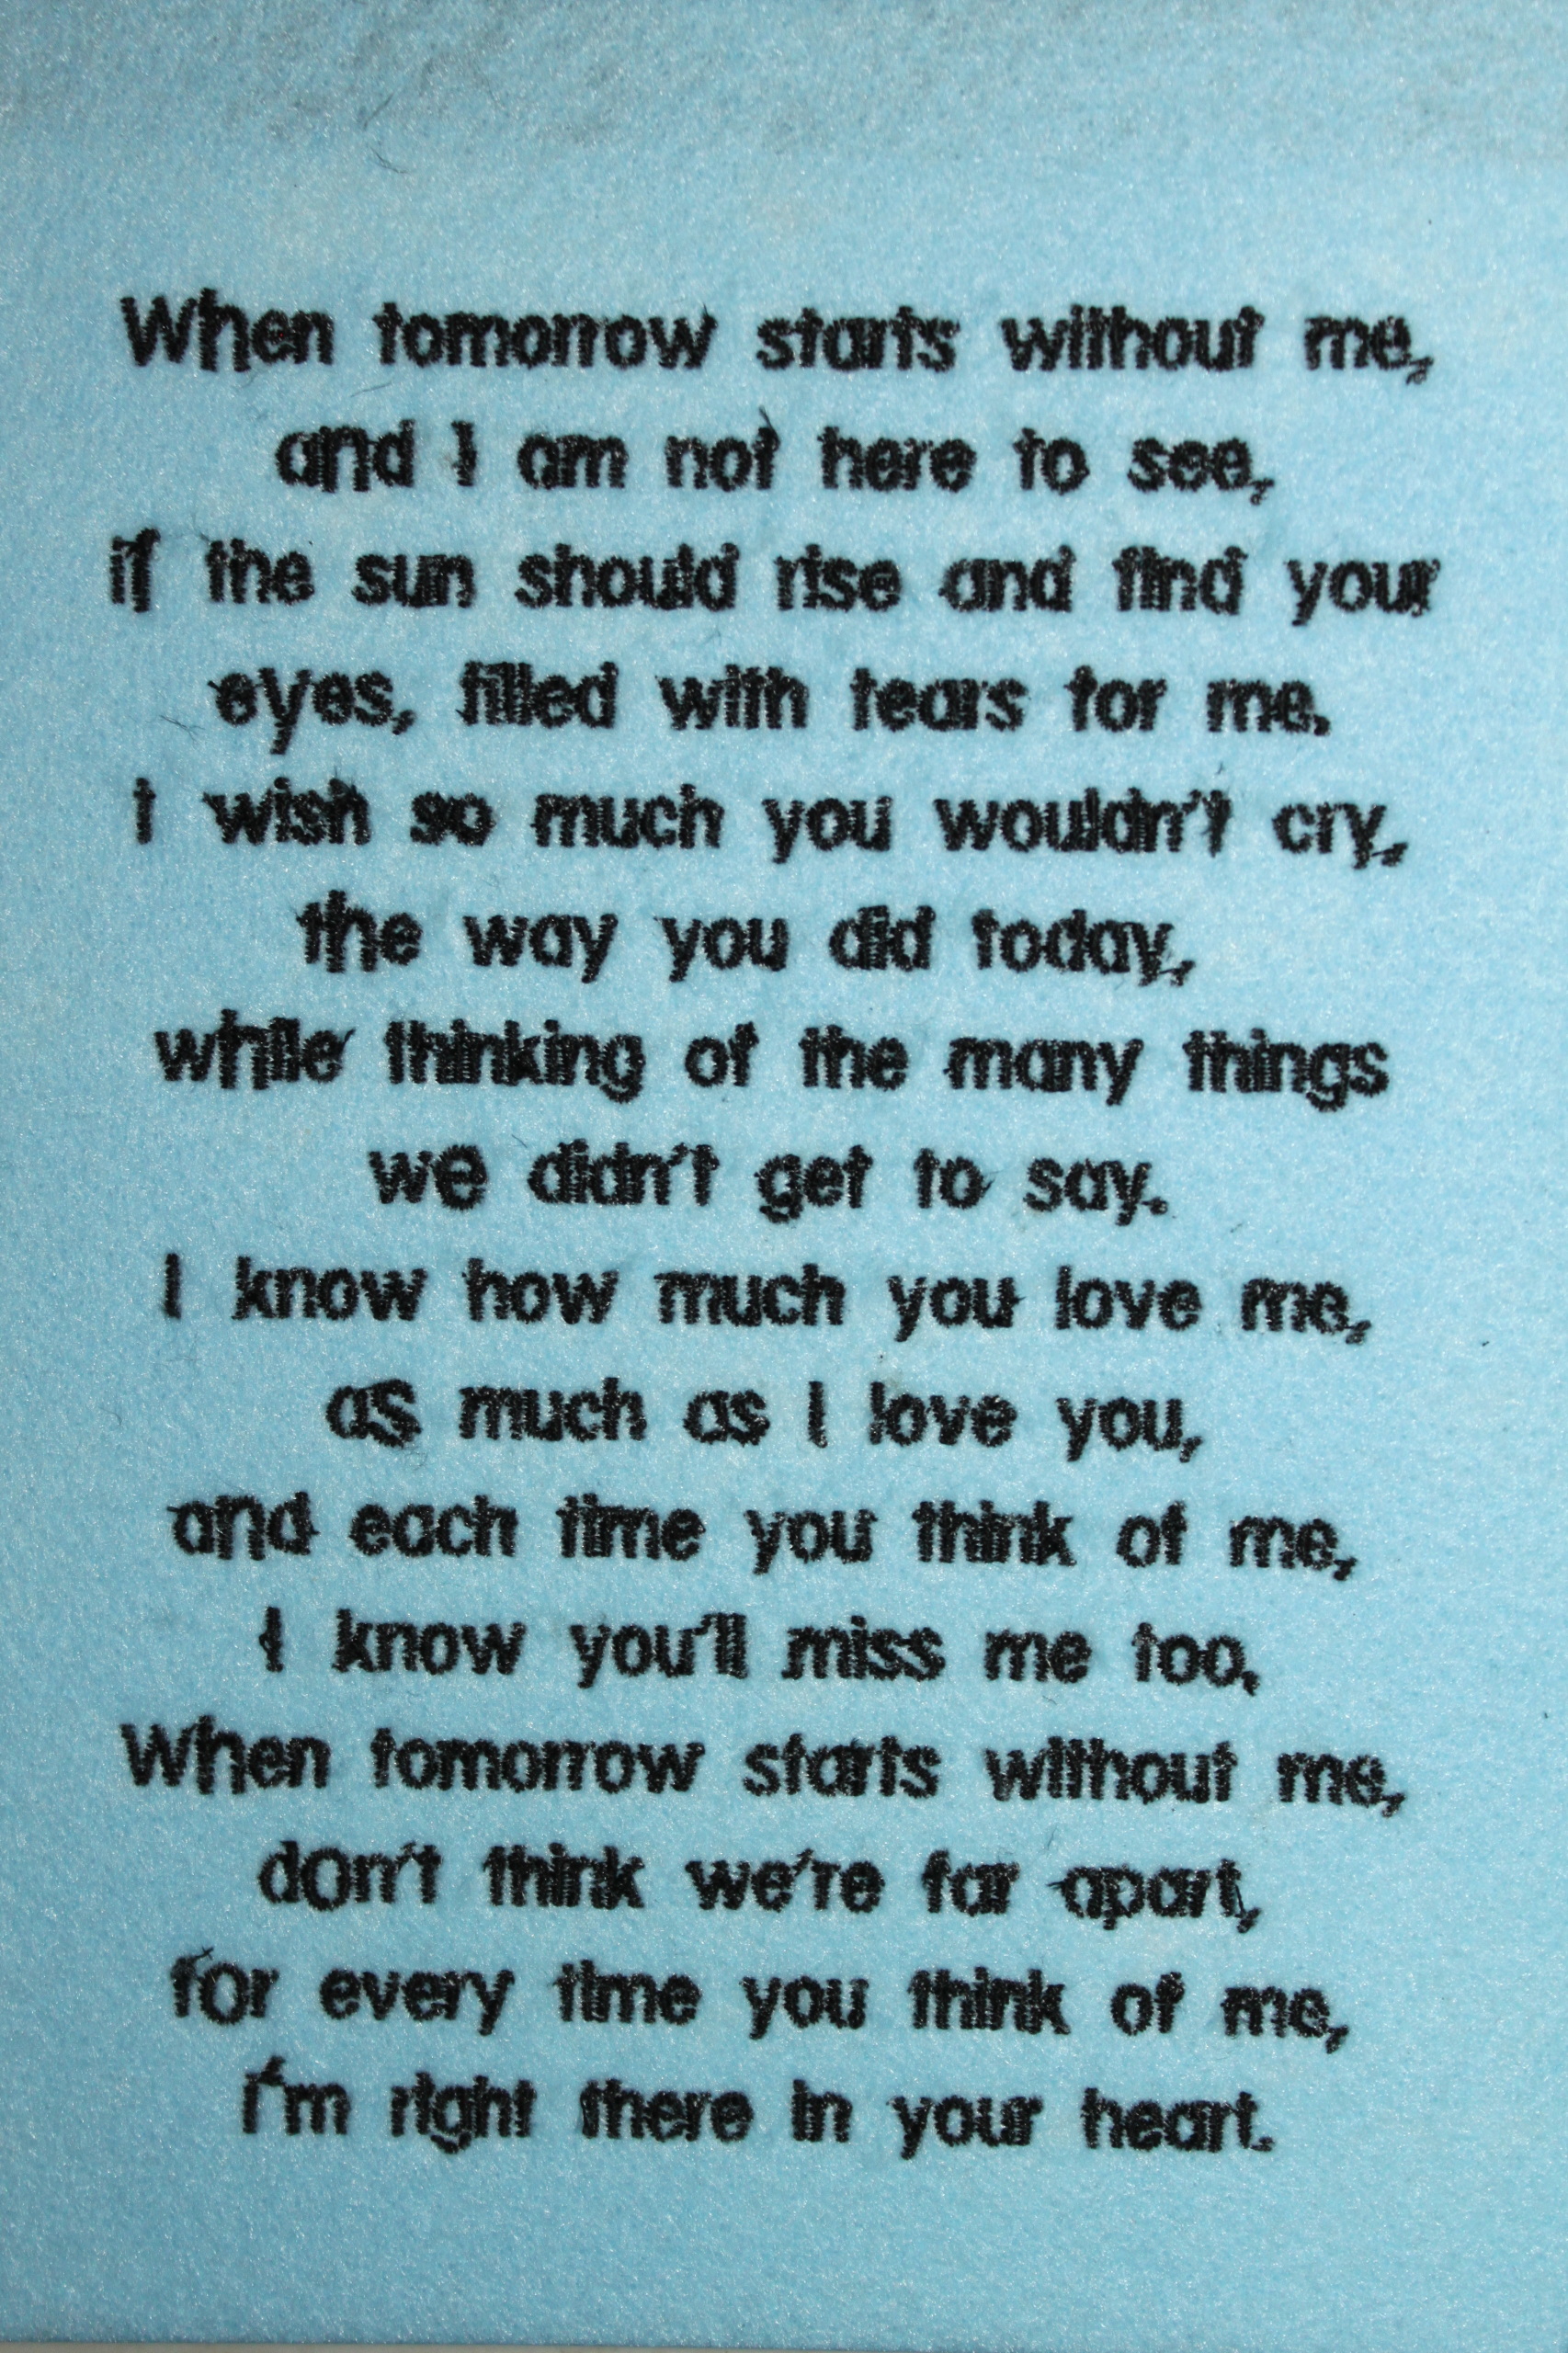 Sympathy Poem When tomorrow starts without me